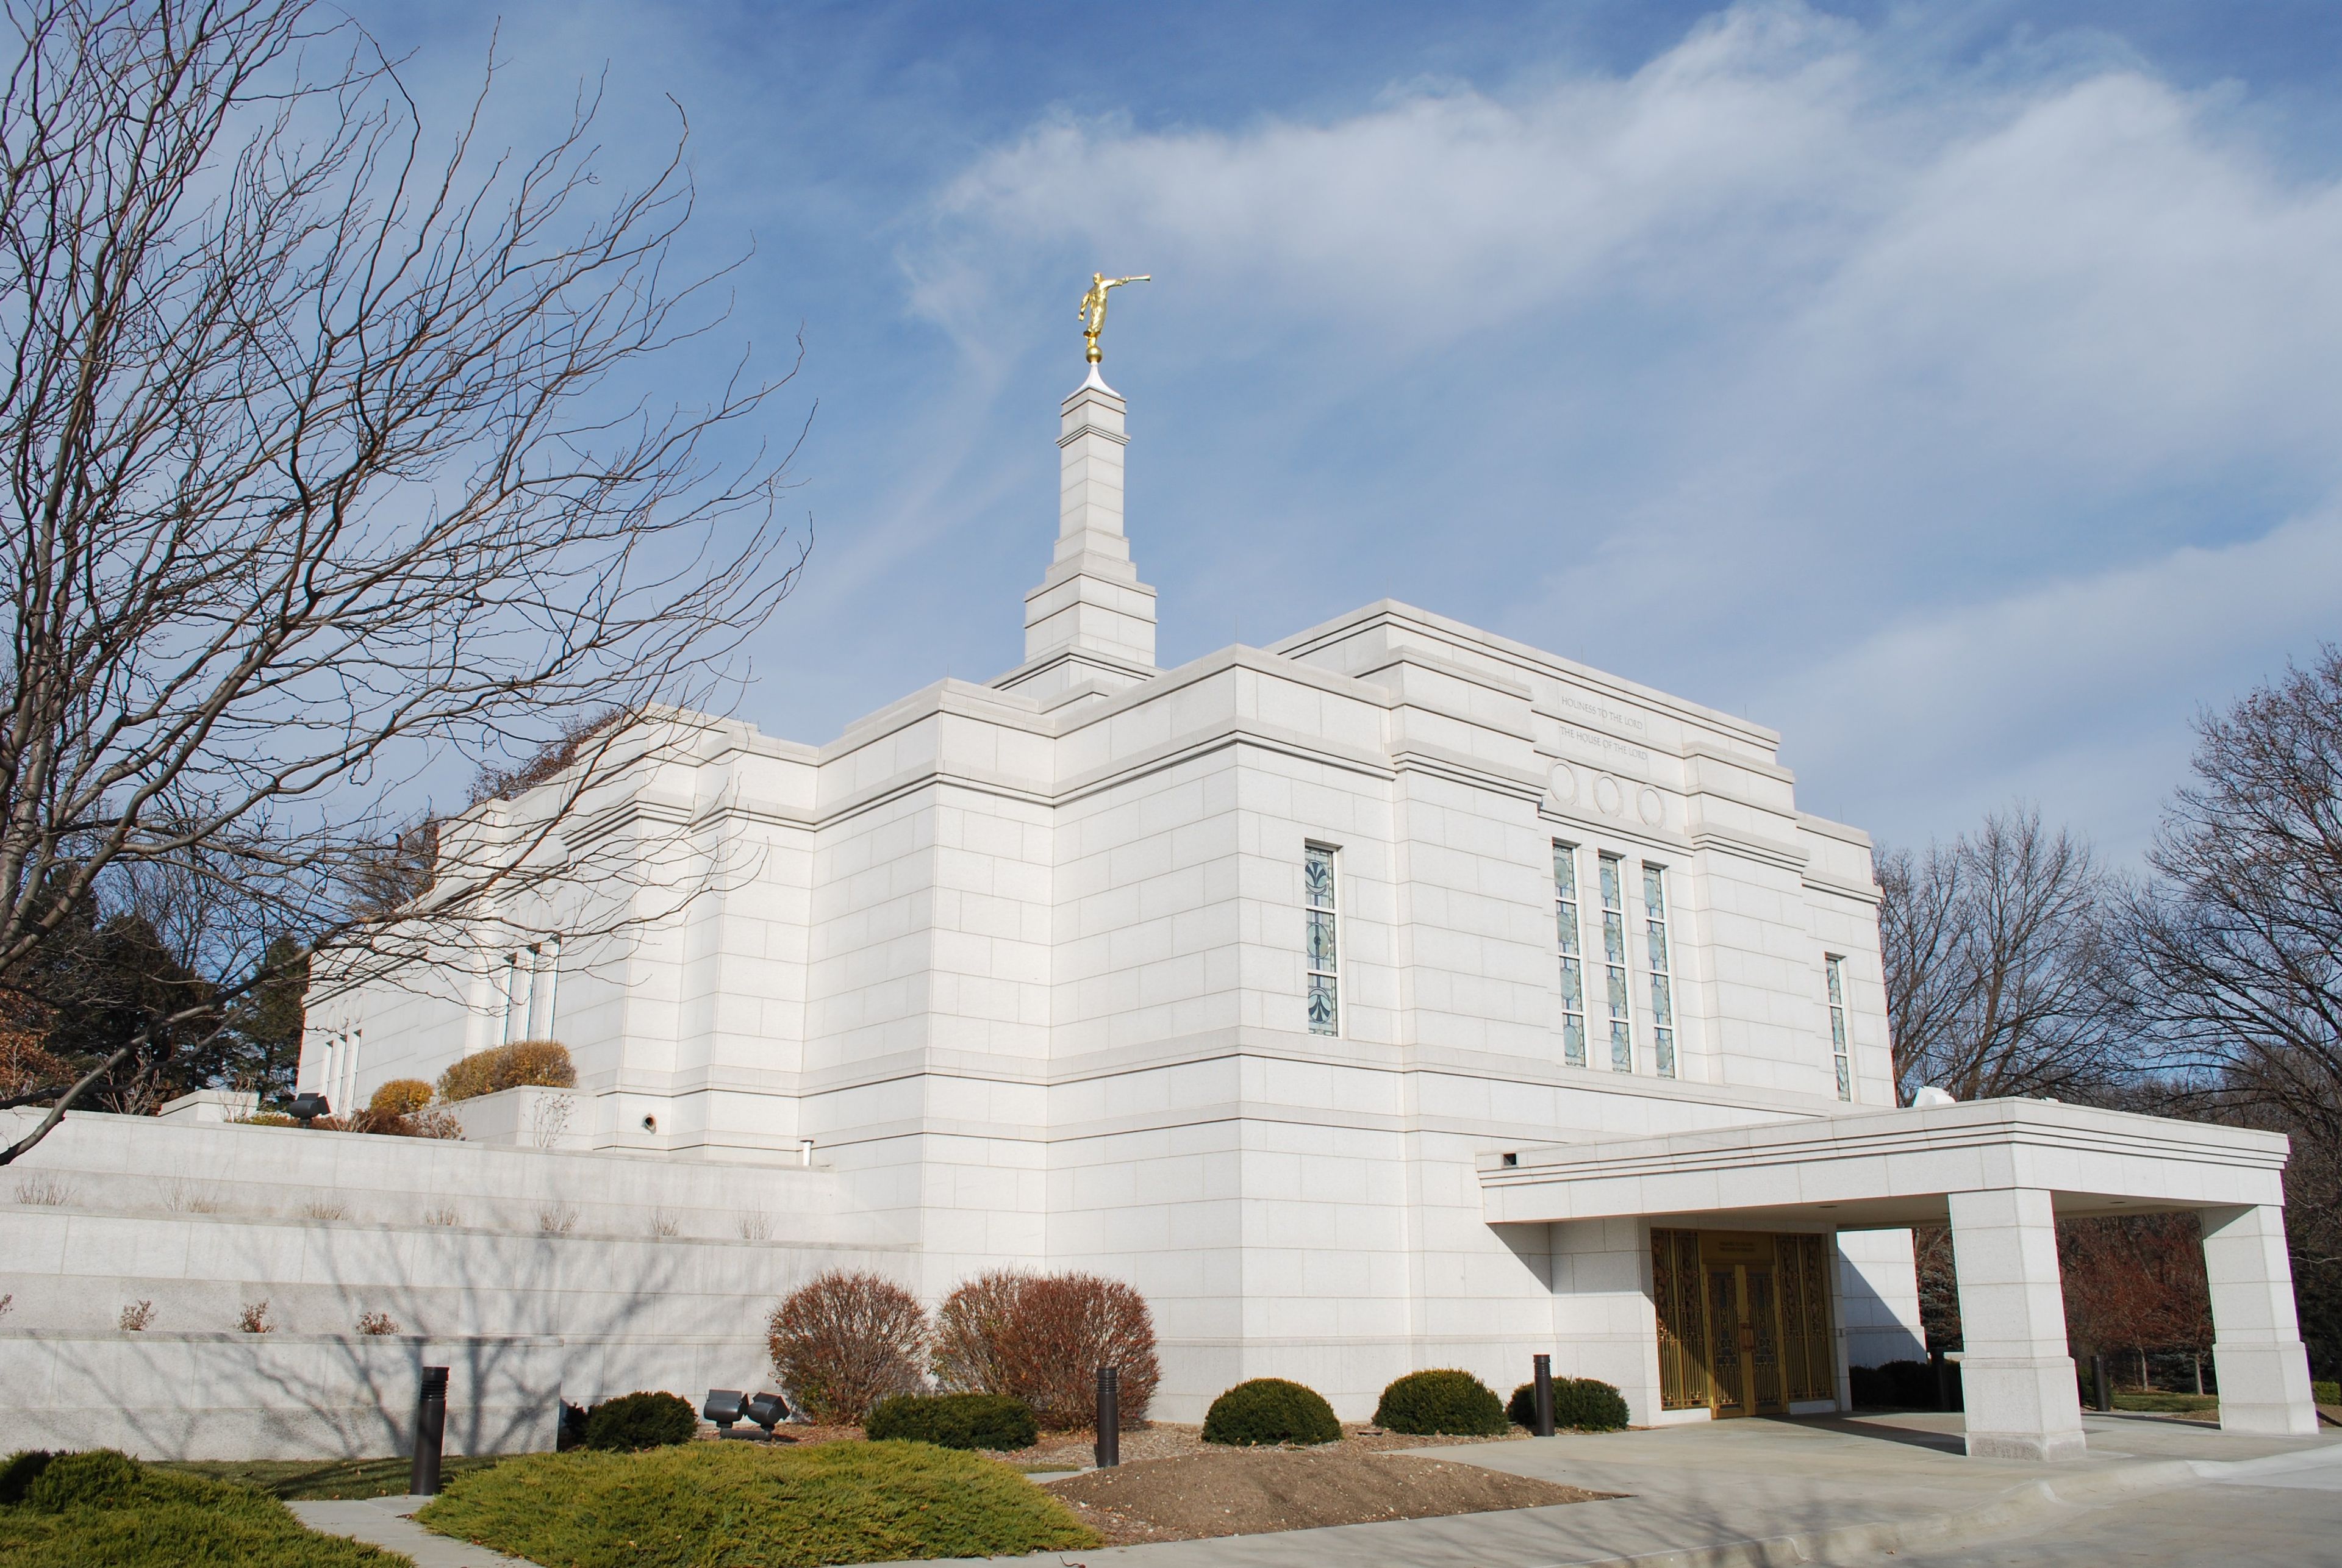 The entire Winter Quarters Nebraska Temple, including the entrance and scenery.